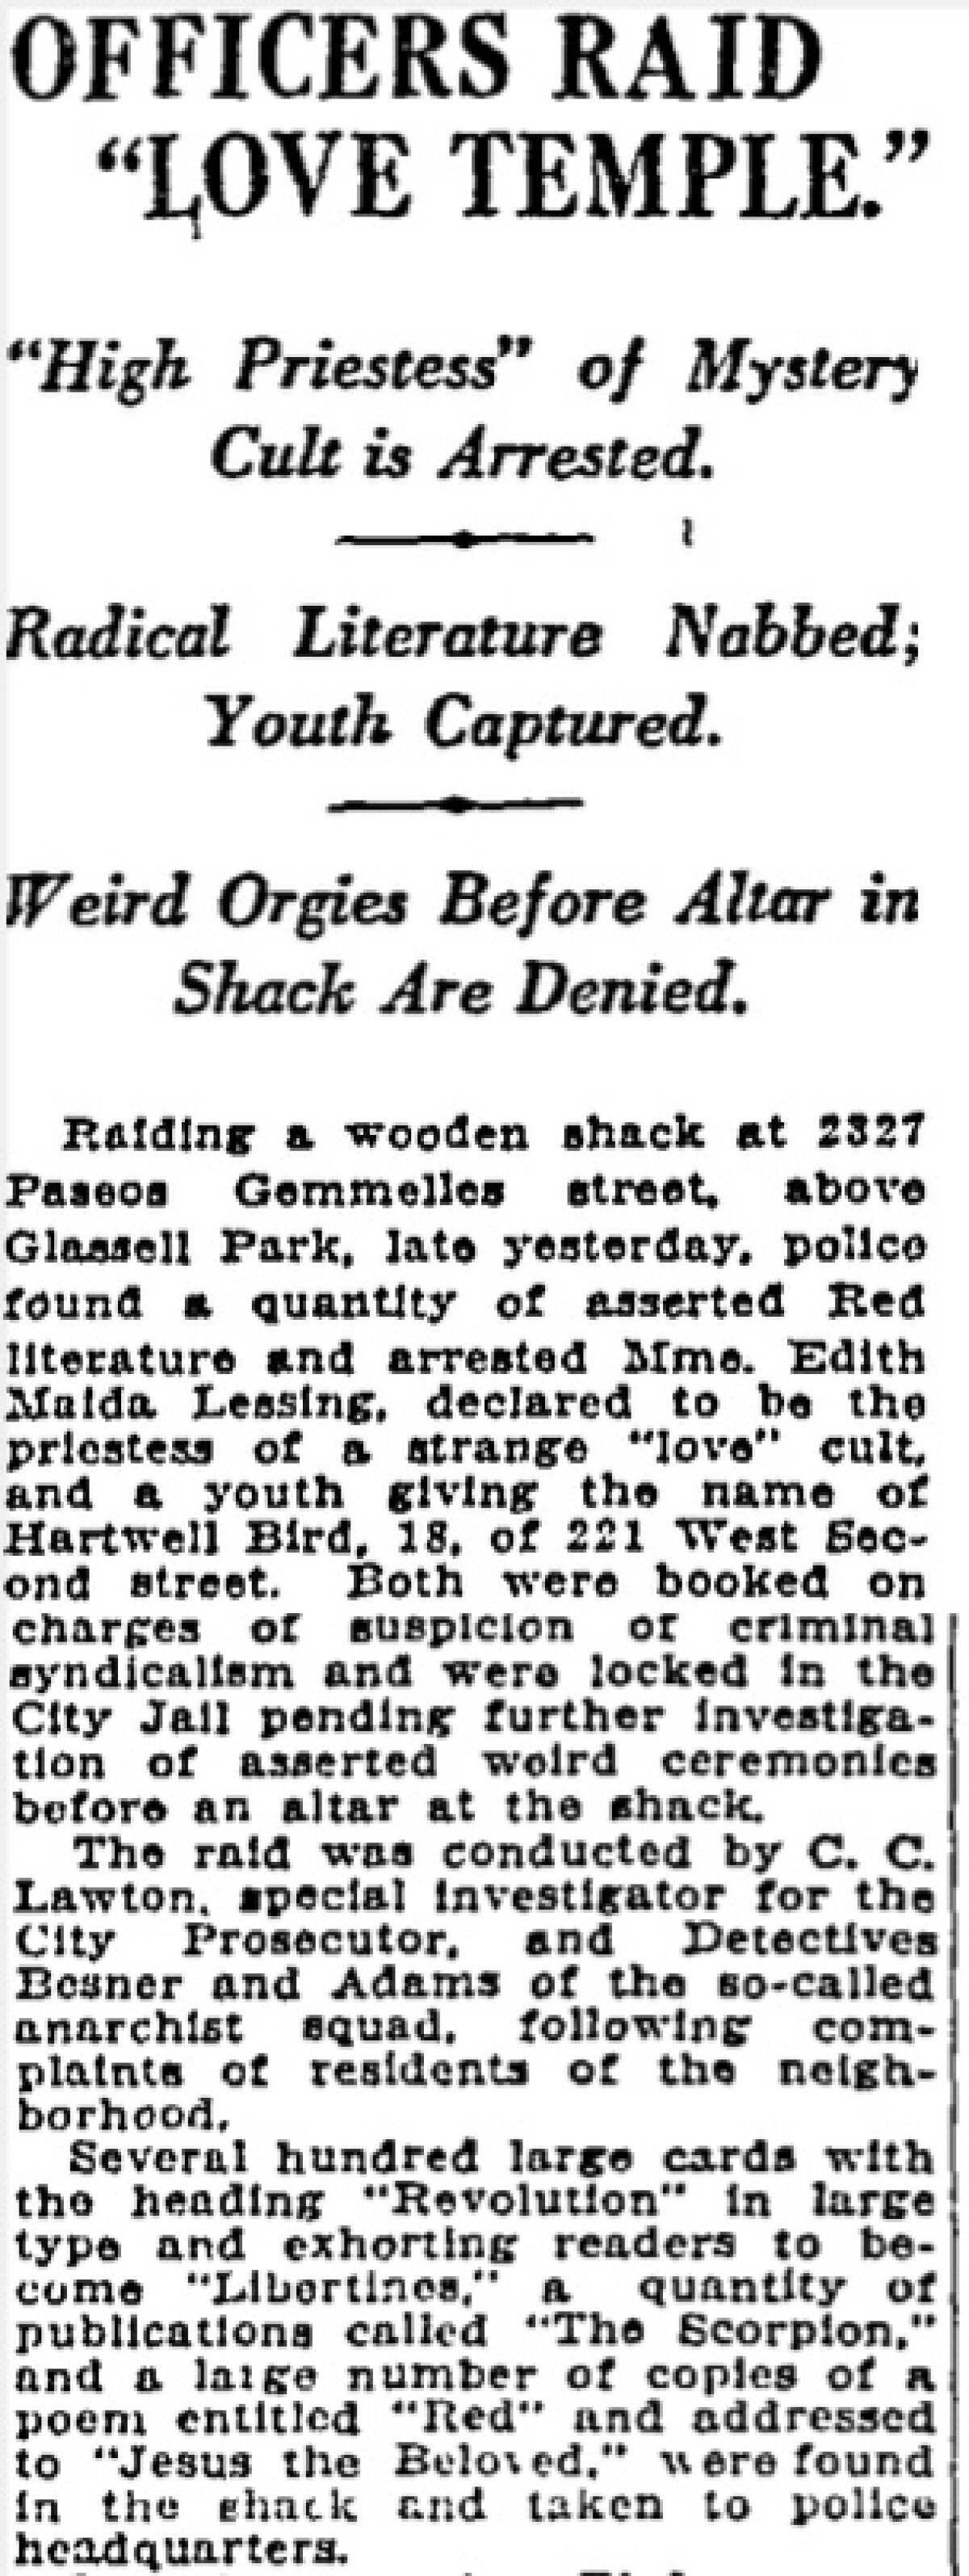 "Officers raid 'love temple,'" the headline reads. And: "Weird orgies before altar in shack are denied."